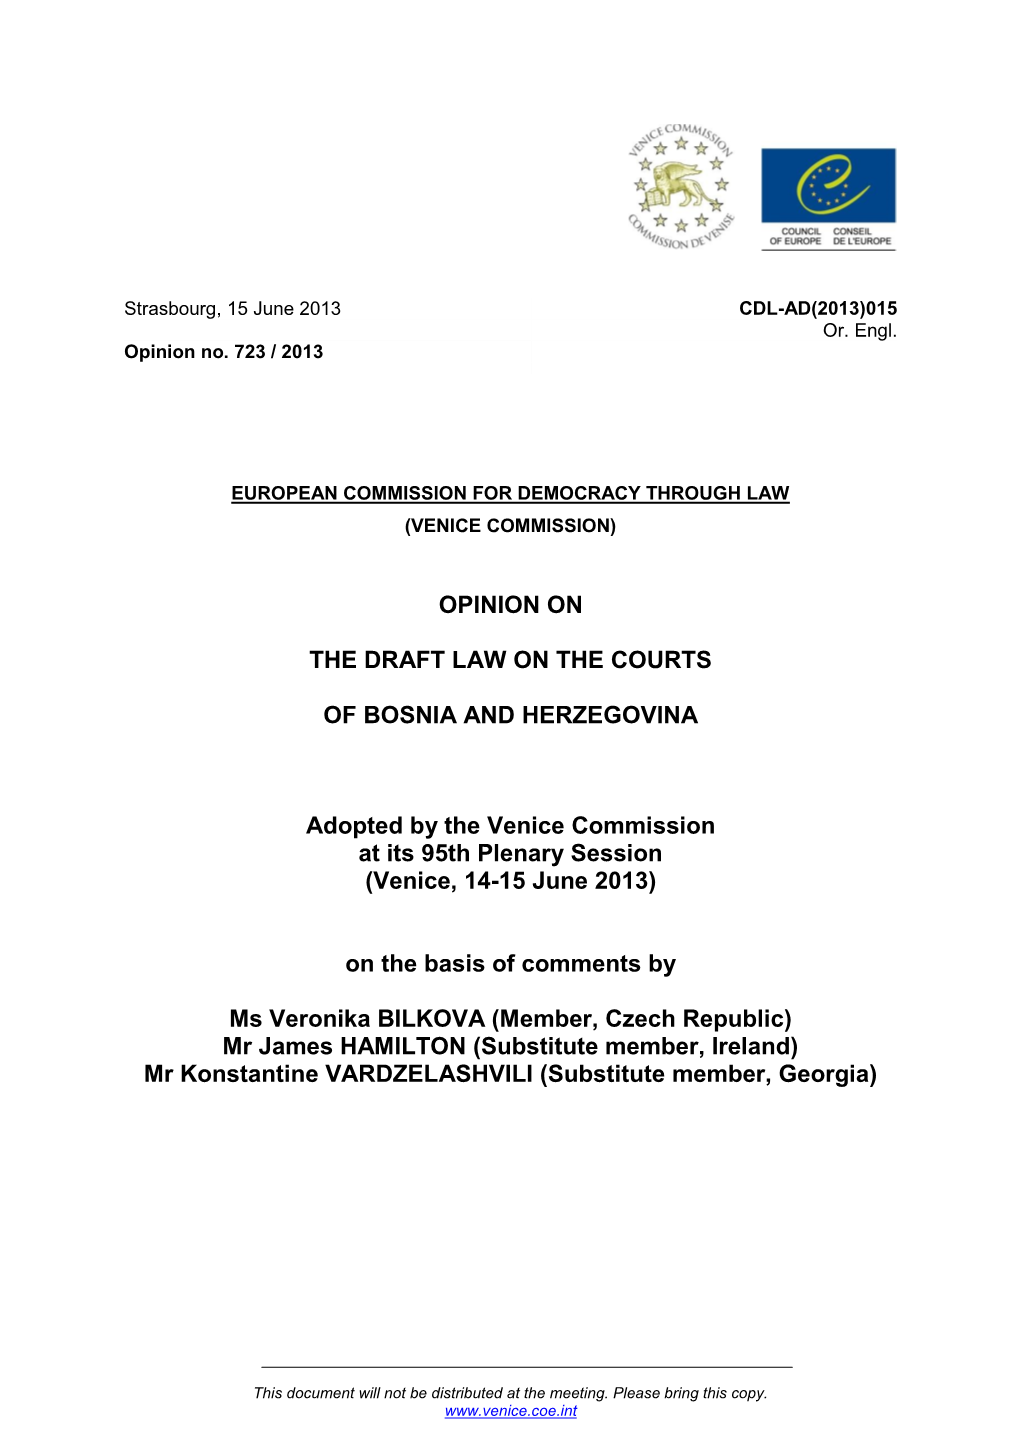 Opinion on the Draft Law on the Courts of Bosnia and Herzegovina (CDL-REF(2013)023)1